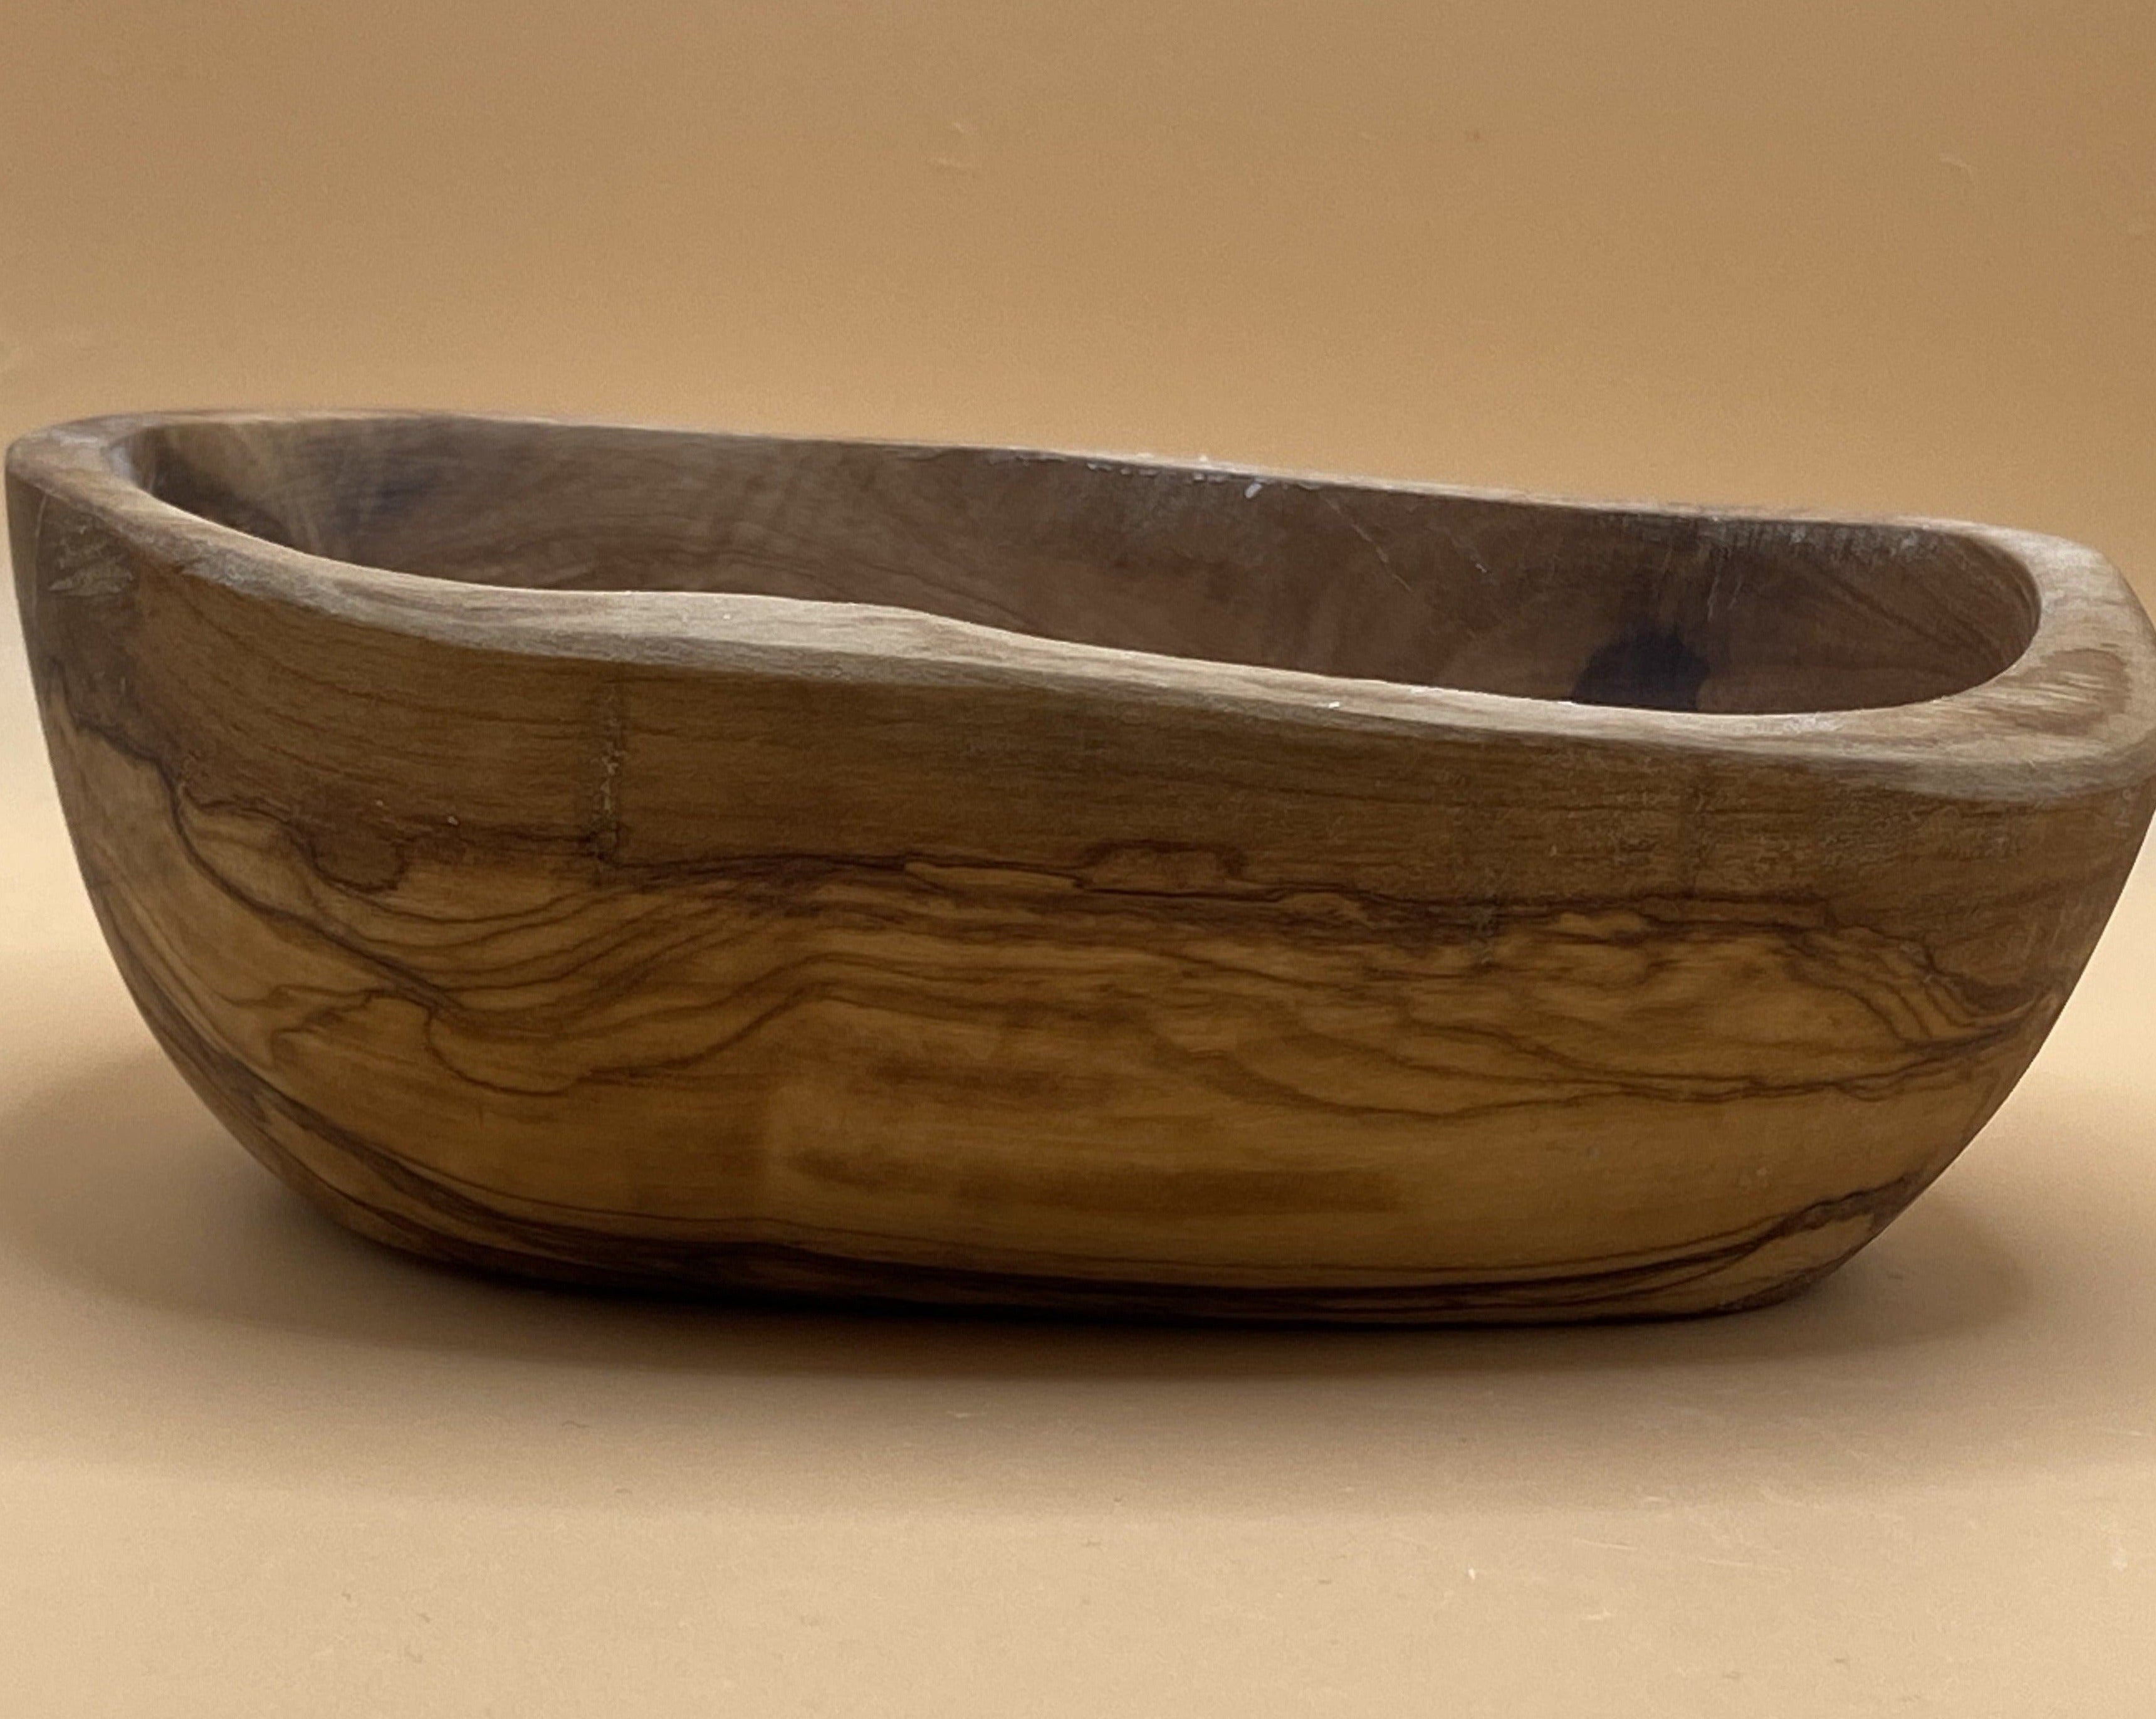 Beautiful and practical olive wood soap dish (side view)